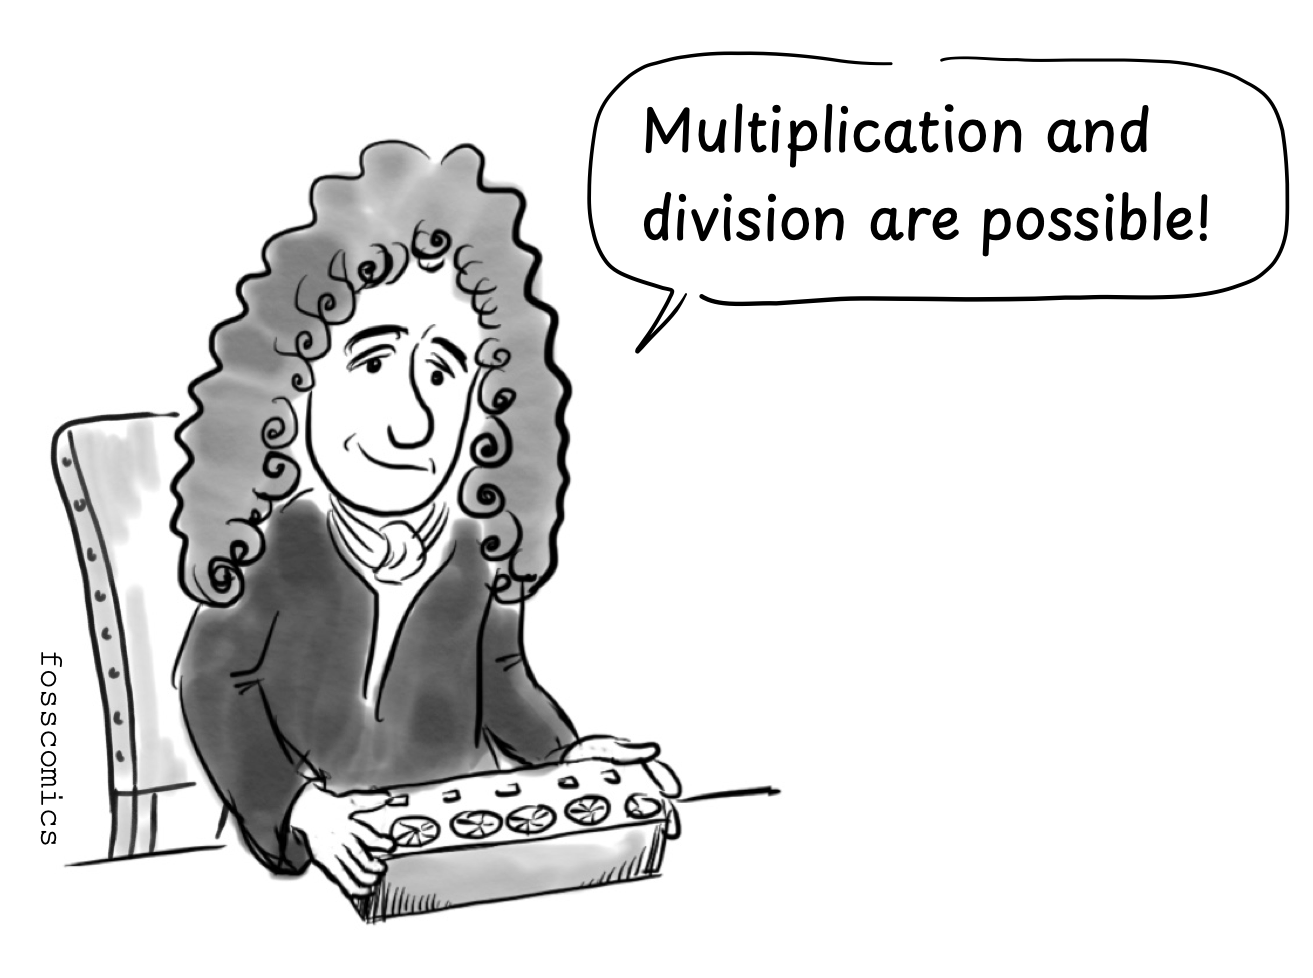 Leibniz says,"This mechanical calculator is capable of multiplication and division."